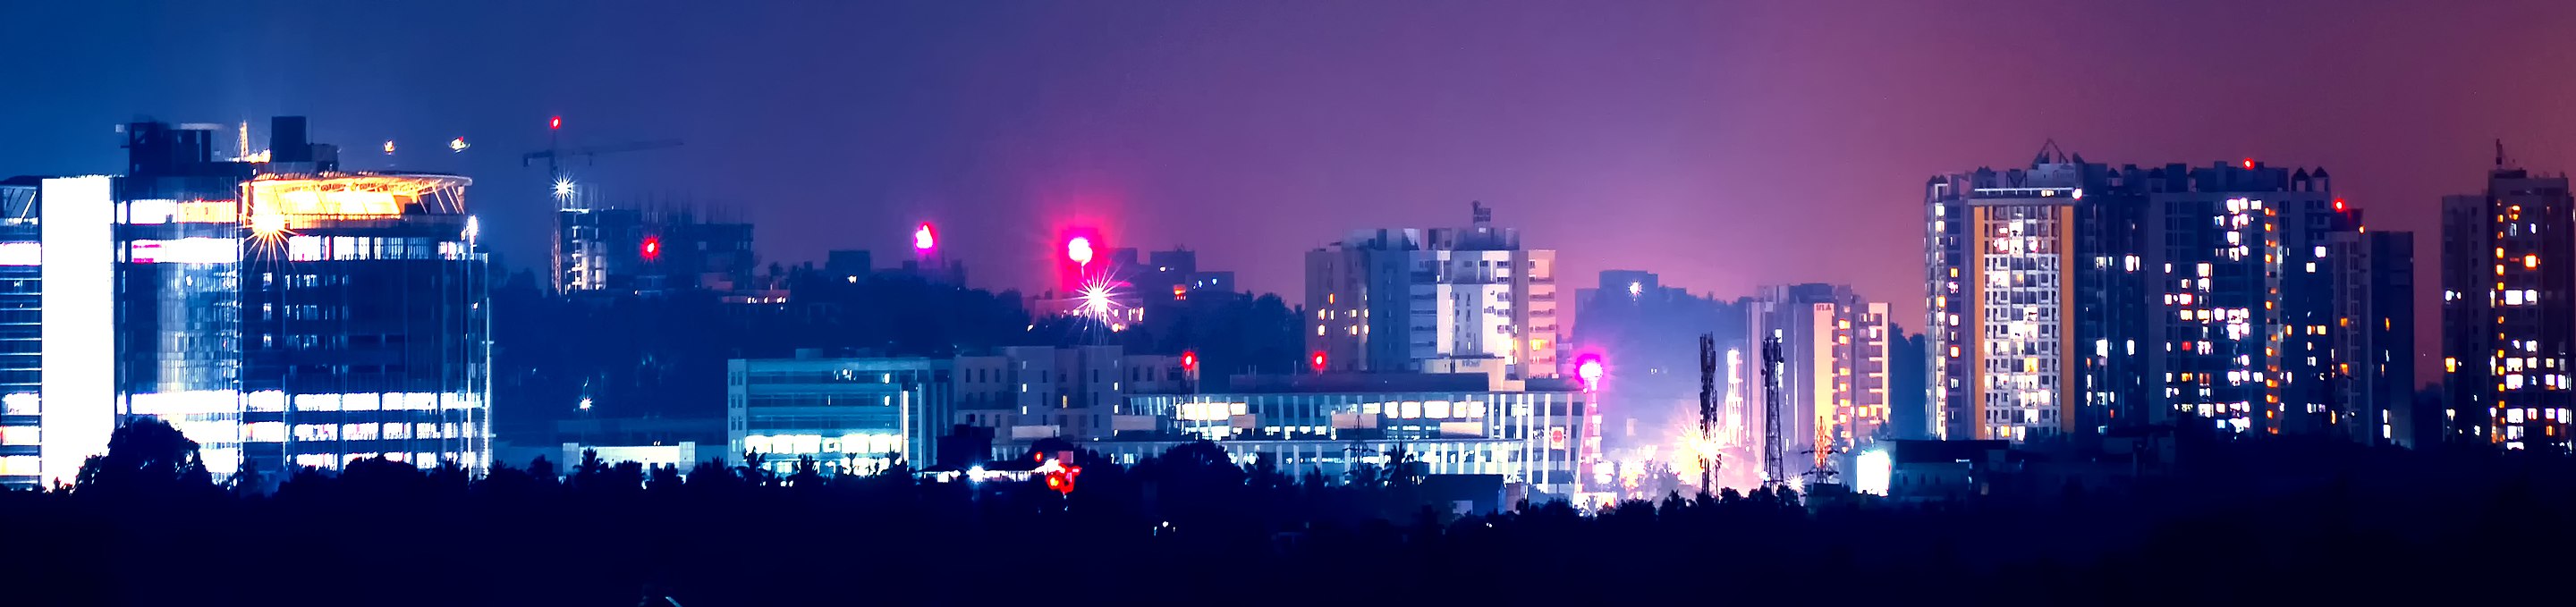 View of Technovalley, in the north western part of the city at night.